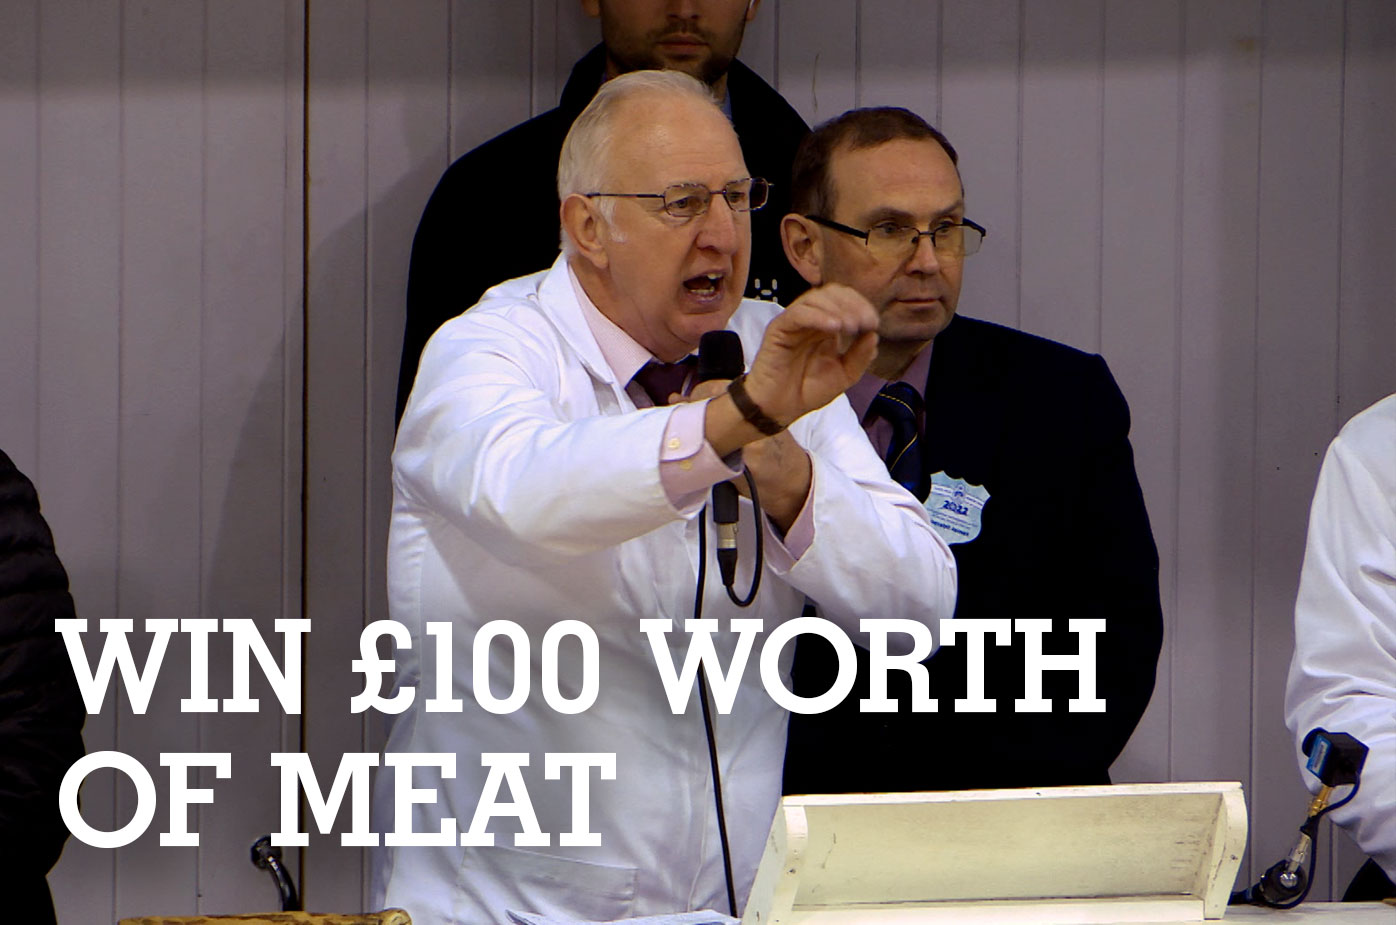 Win £100 worth of meat